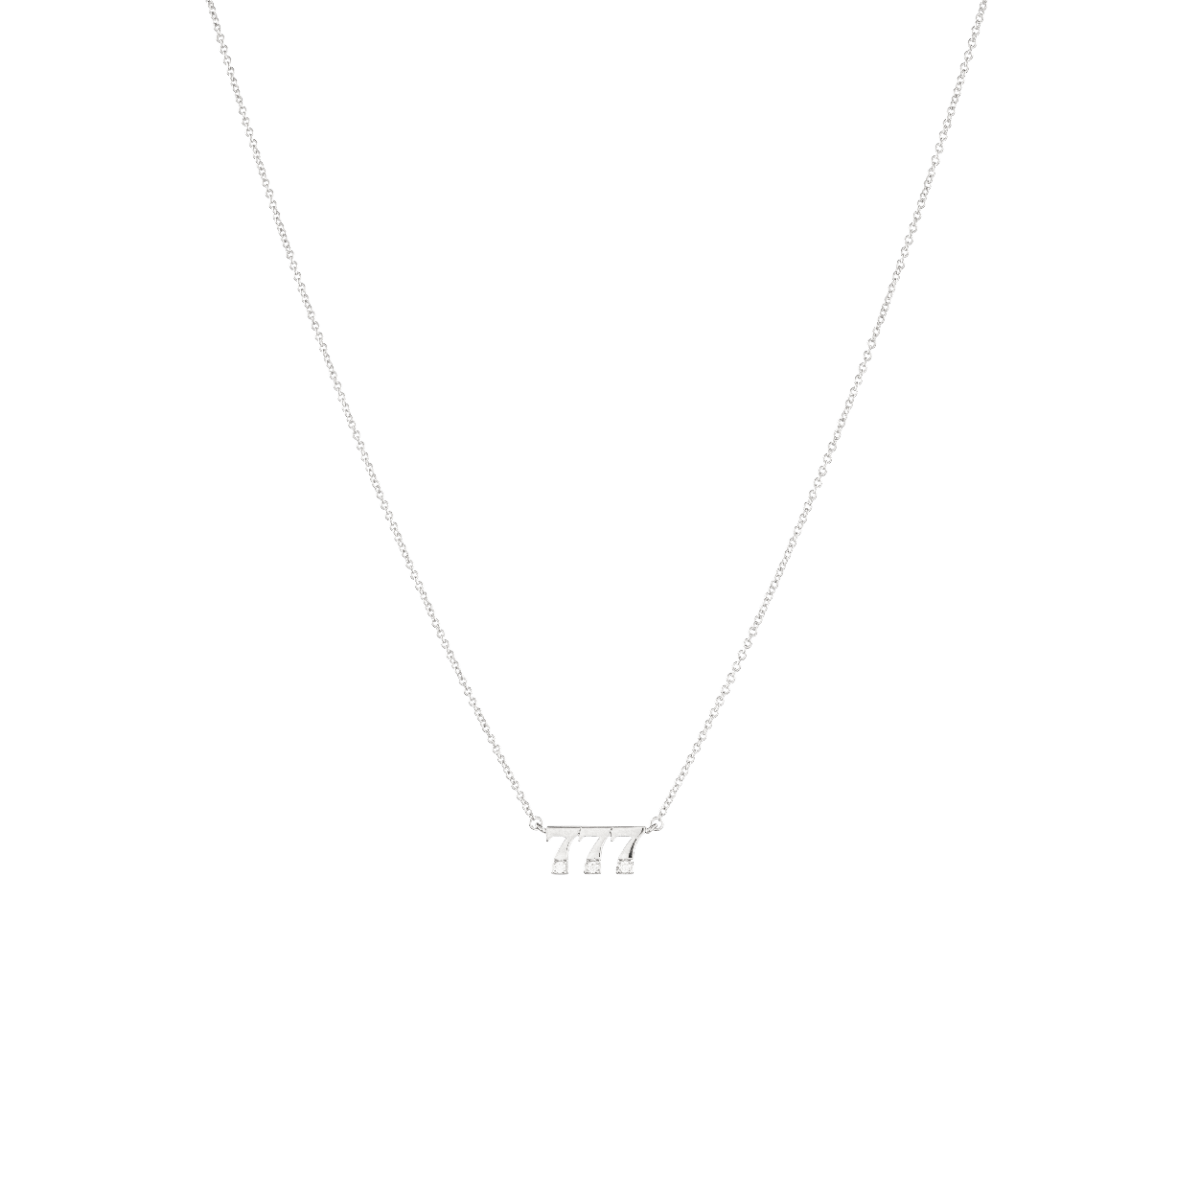 777 - Luck Necklace